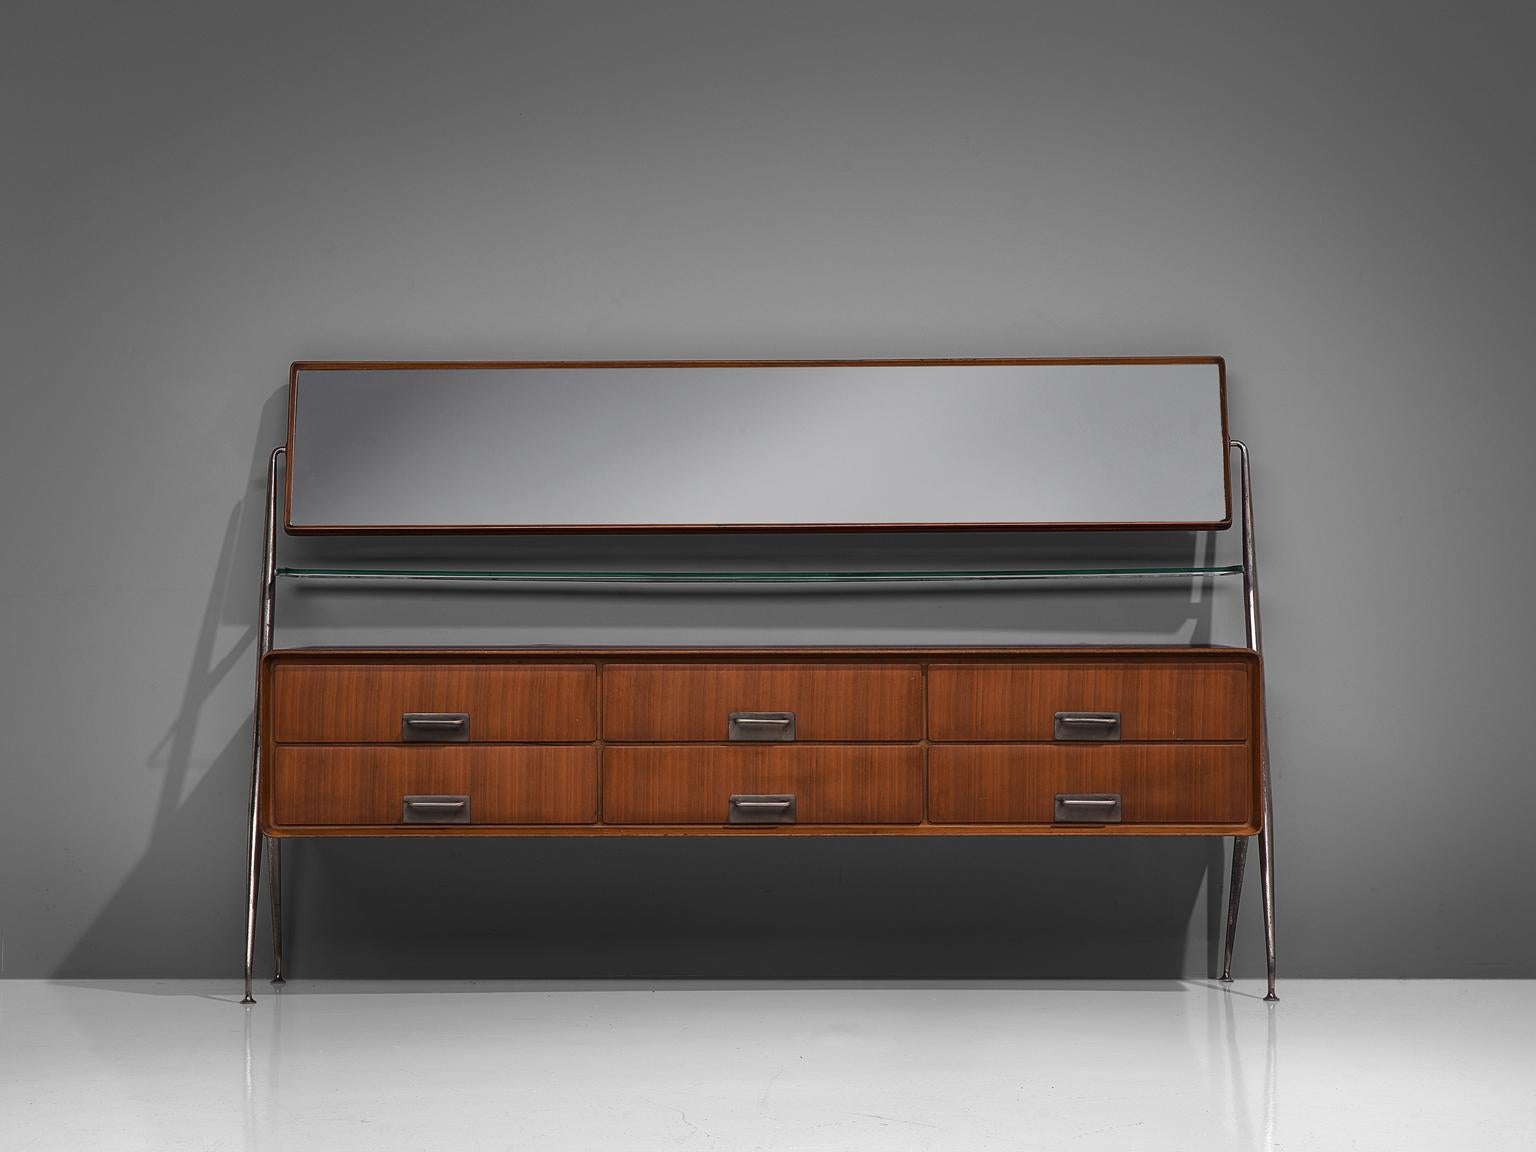 Silvio Cavatorta, sideboard, metal, mahogany and glass, Italy, 1958.

Elegant and rare Italian sideboard by Silvio Cavatorta. This cabinet is equipped with six drawers, a glass shelf and a pivoting mirror with a spanning of 180 cm. The mahogany